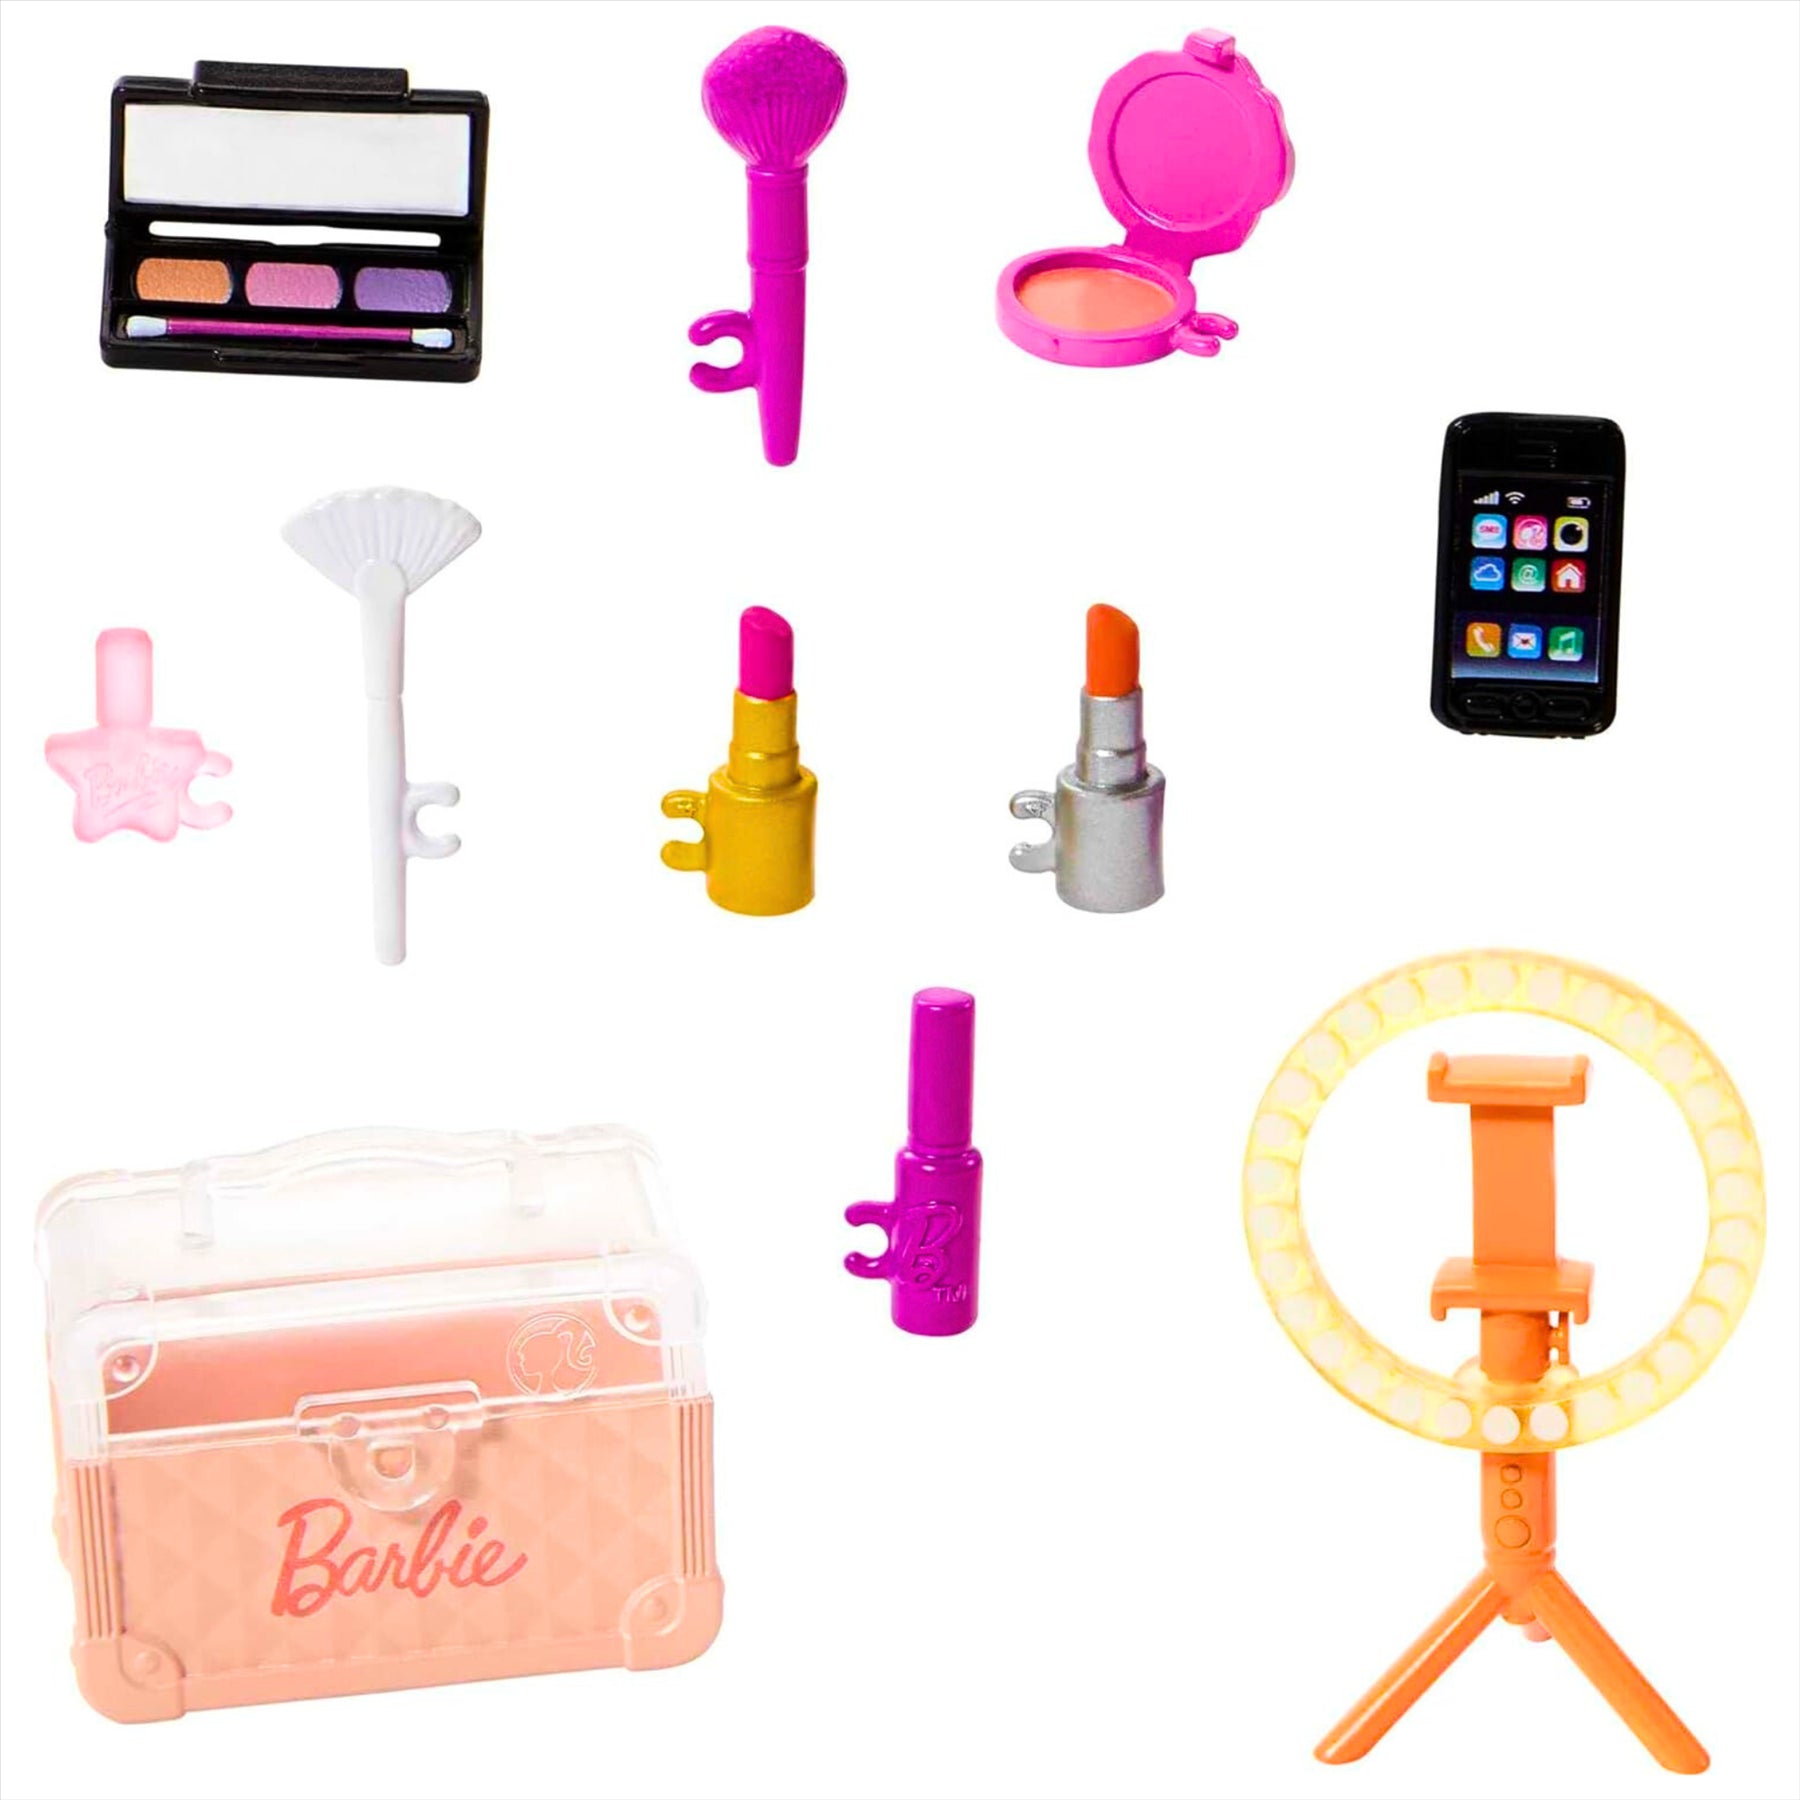 Barbie 27 Piece Doll and House Accessory Set with Cake, Plates, Make-Up, and Phone - Twin Pack